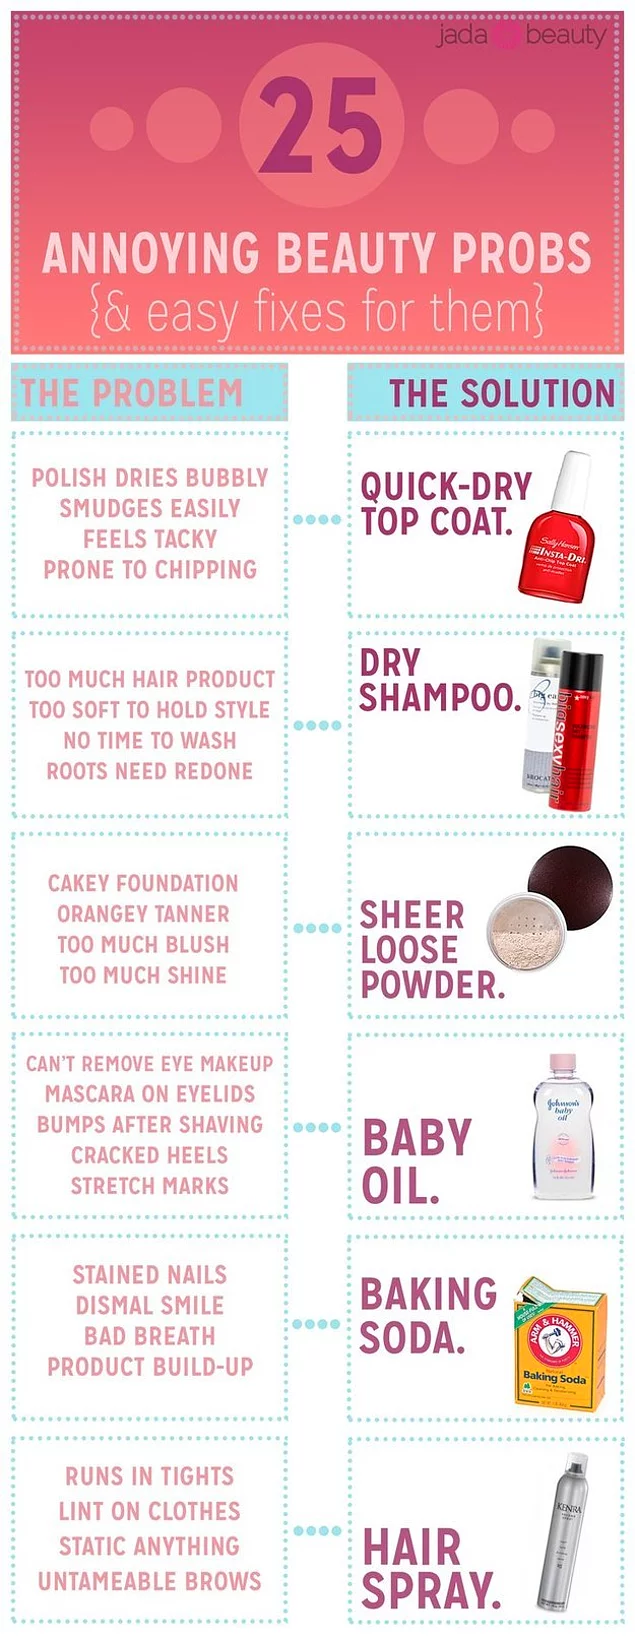 Your beauty problems, fixed.